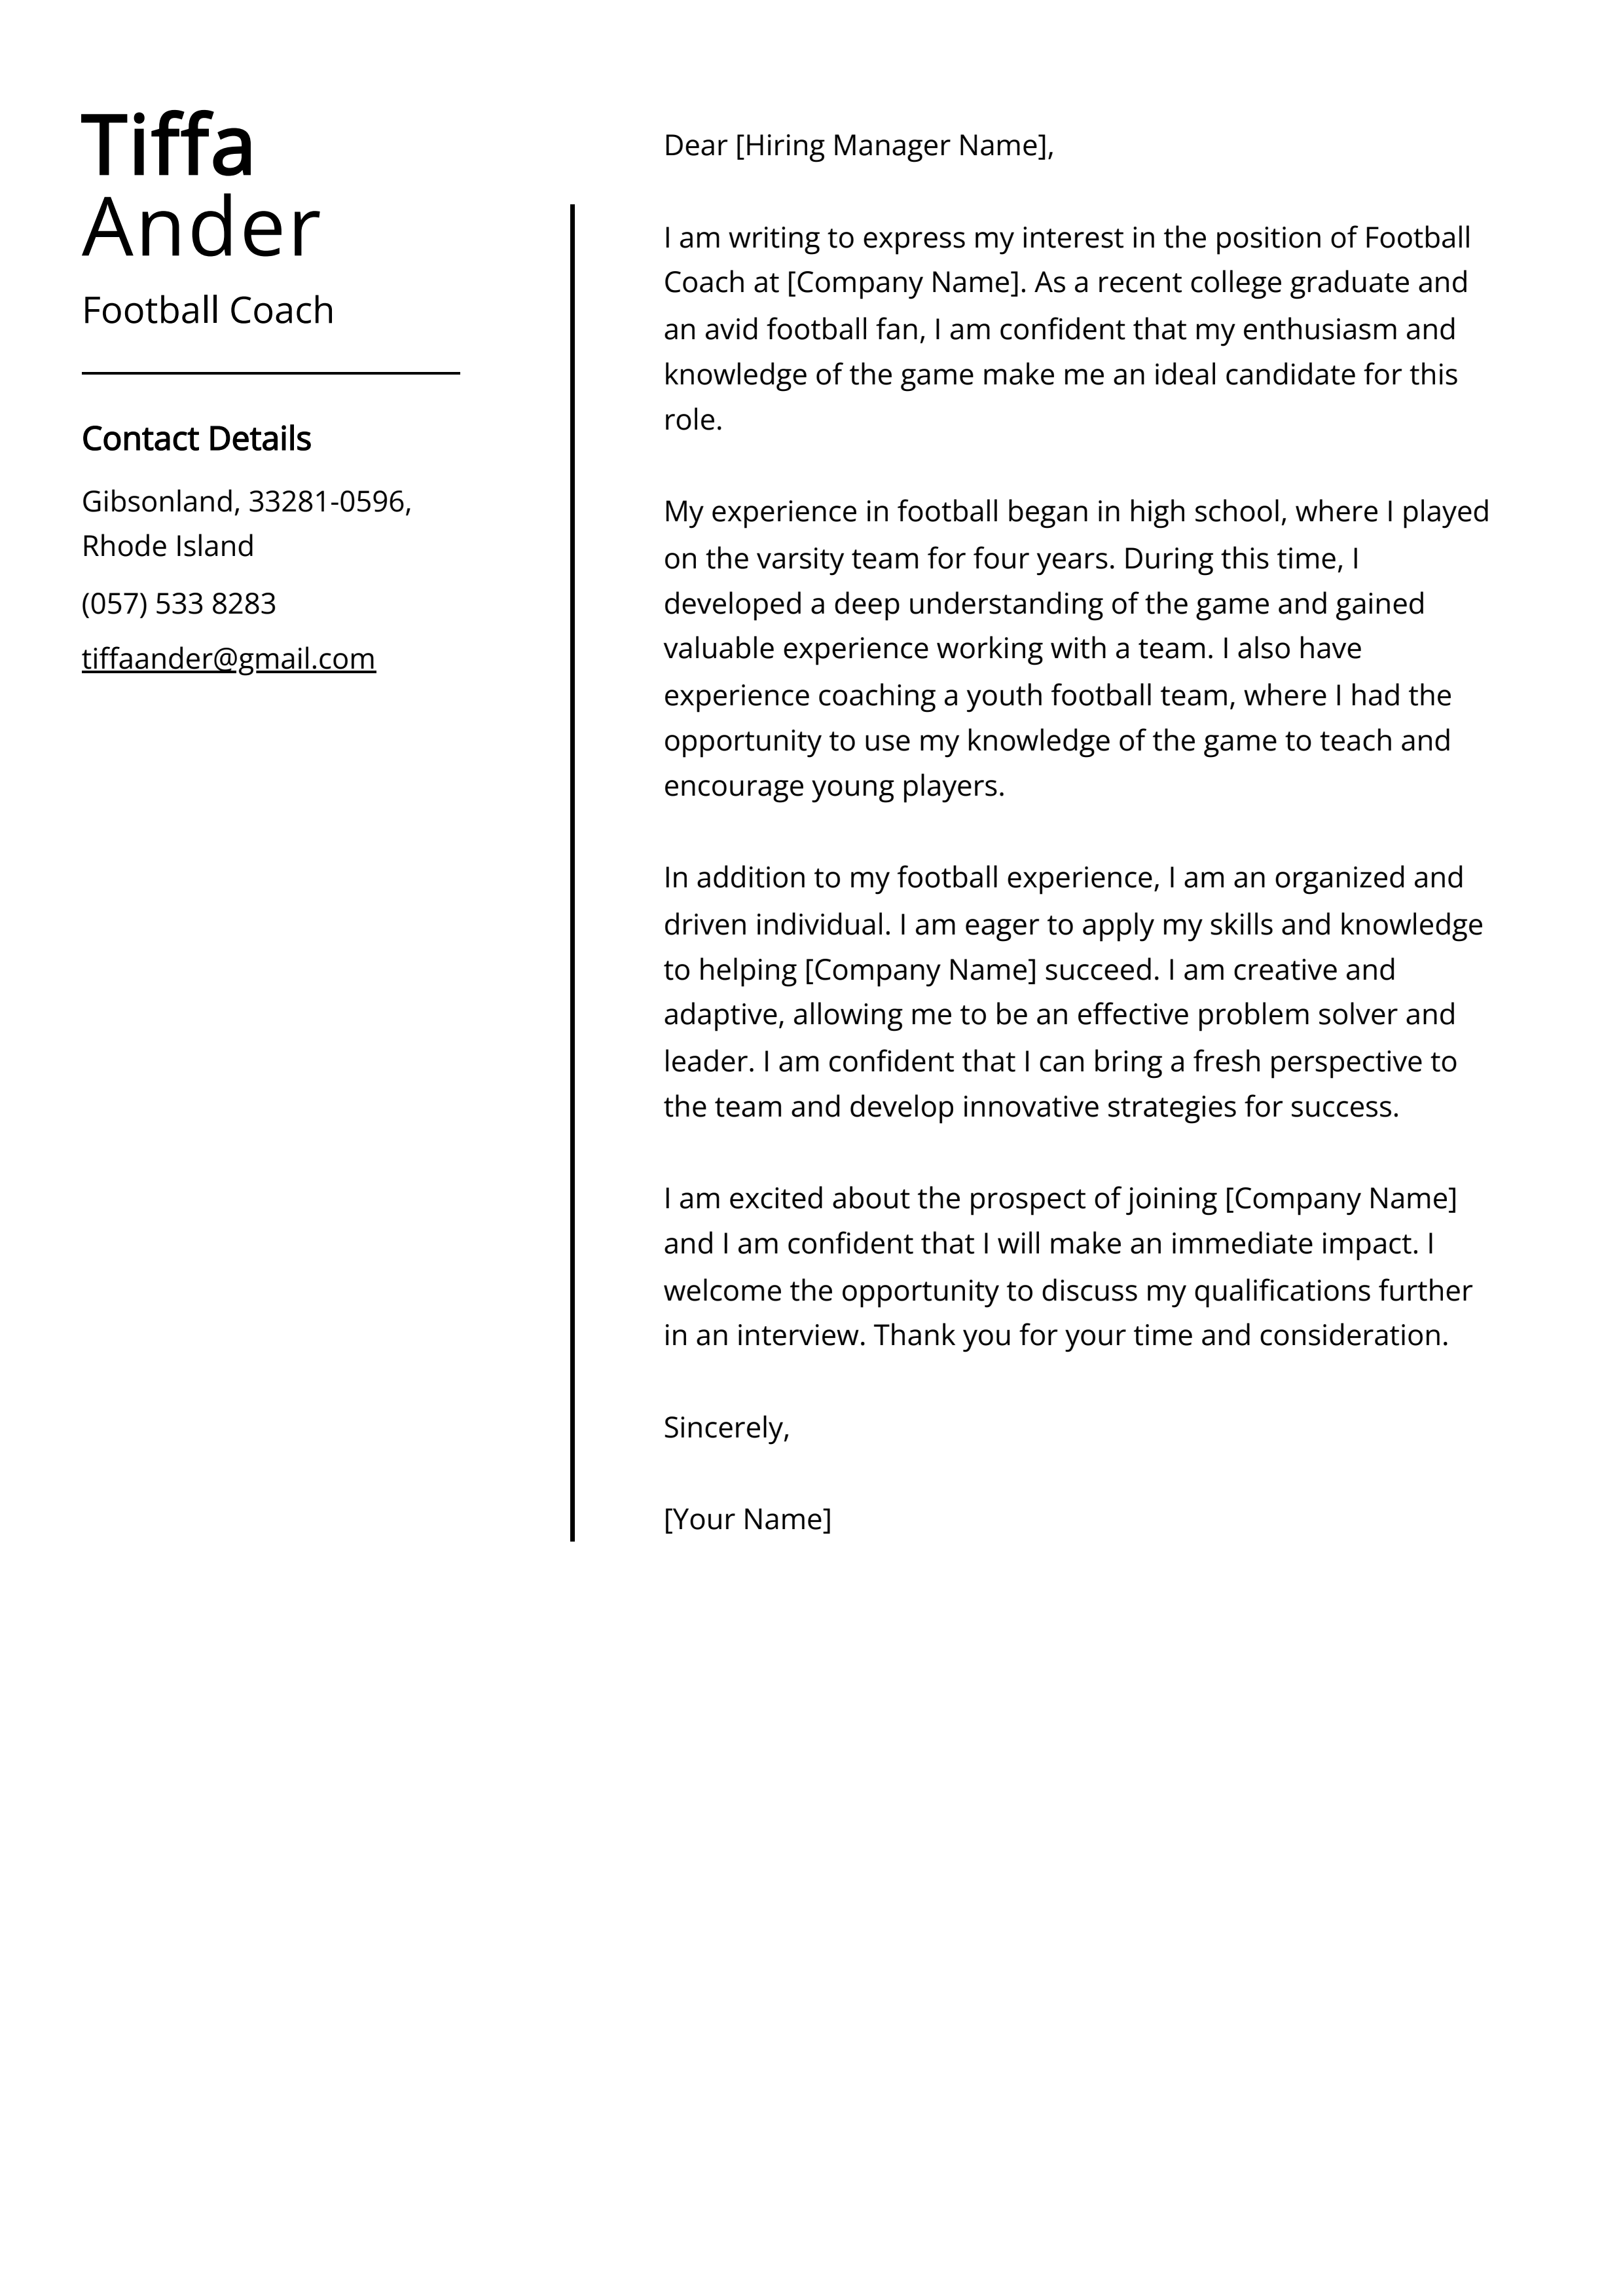 Football Coach Cover Letter Example